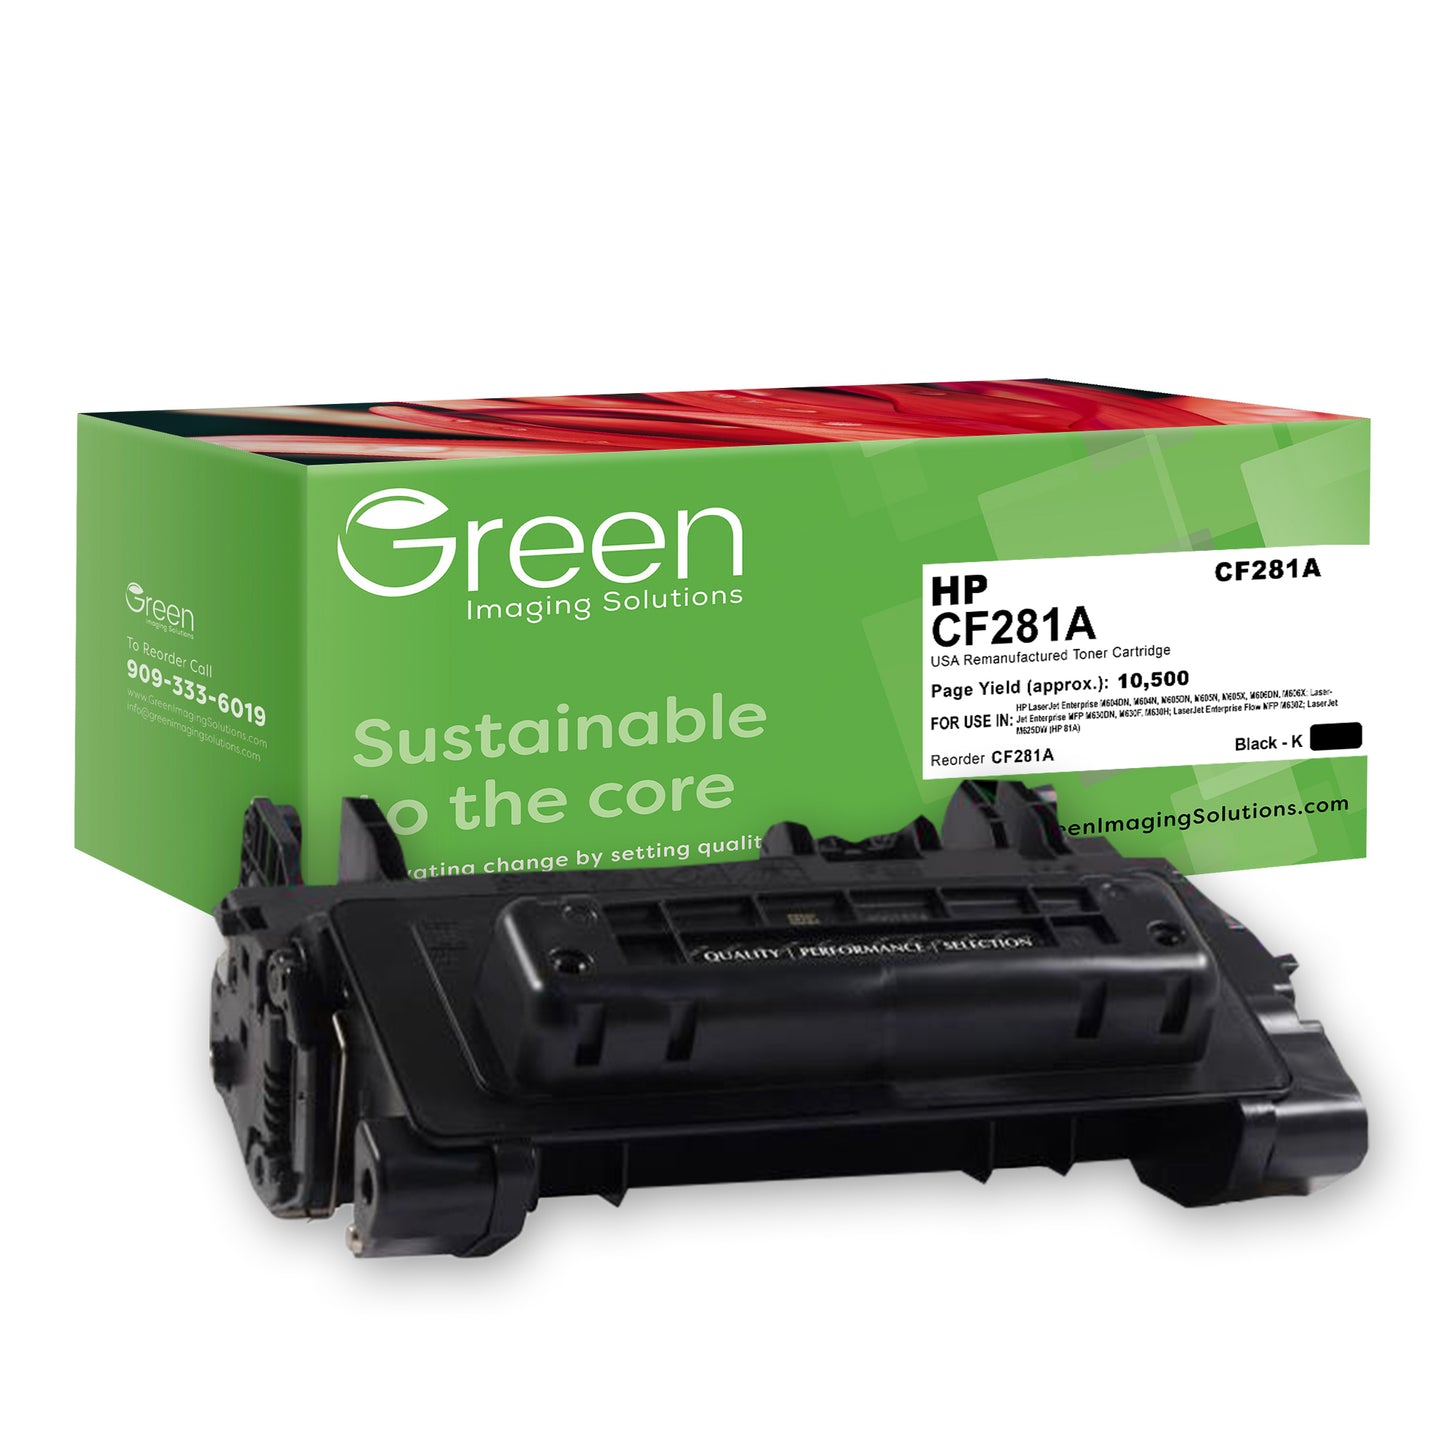 GIS USA Remanufactured Toner Cartridge for HP CF281A (HP 81A)